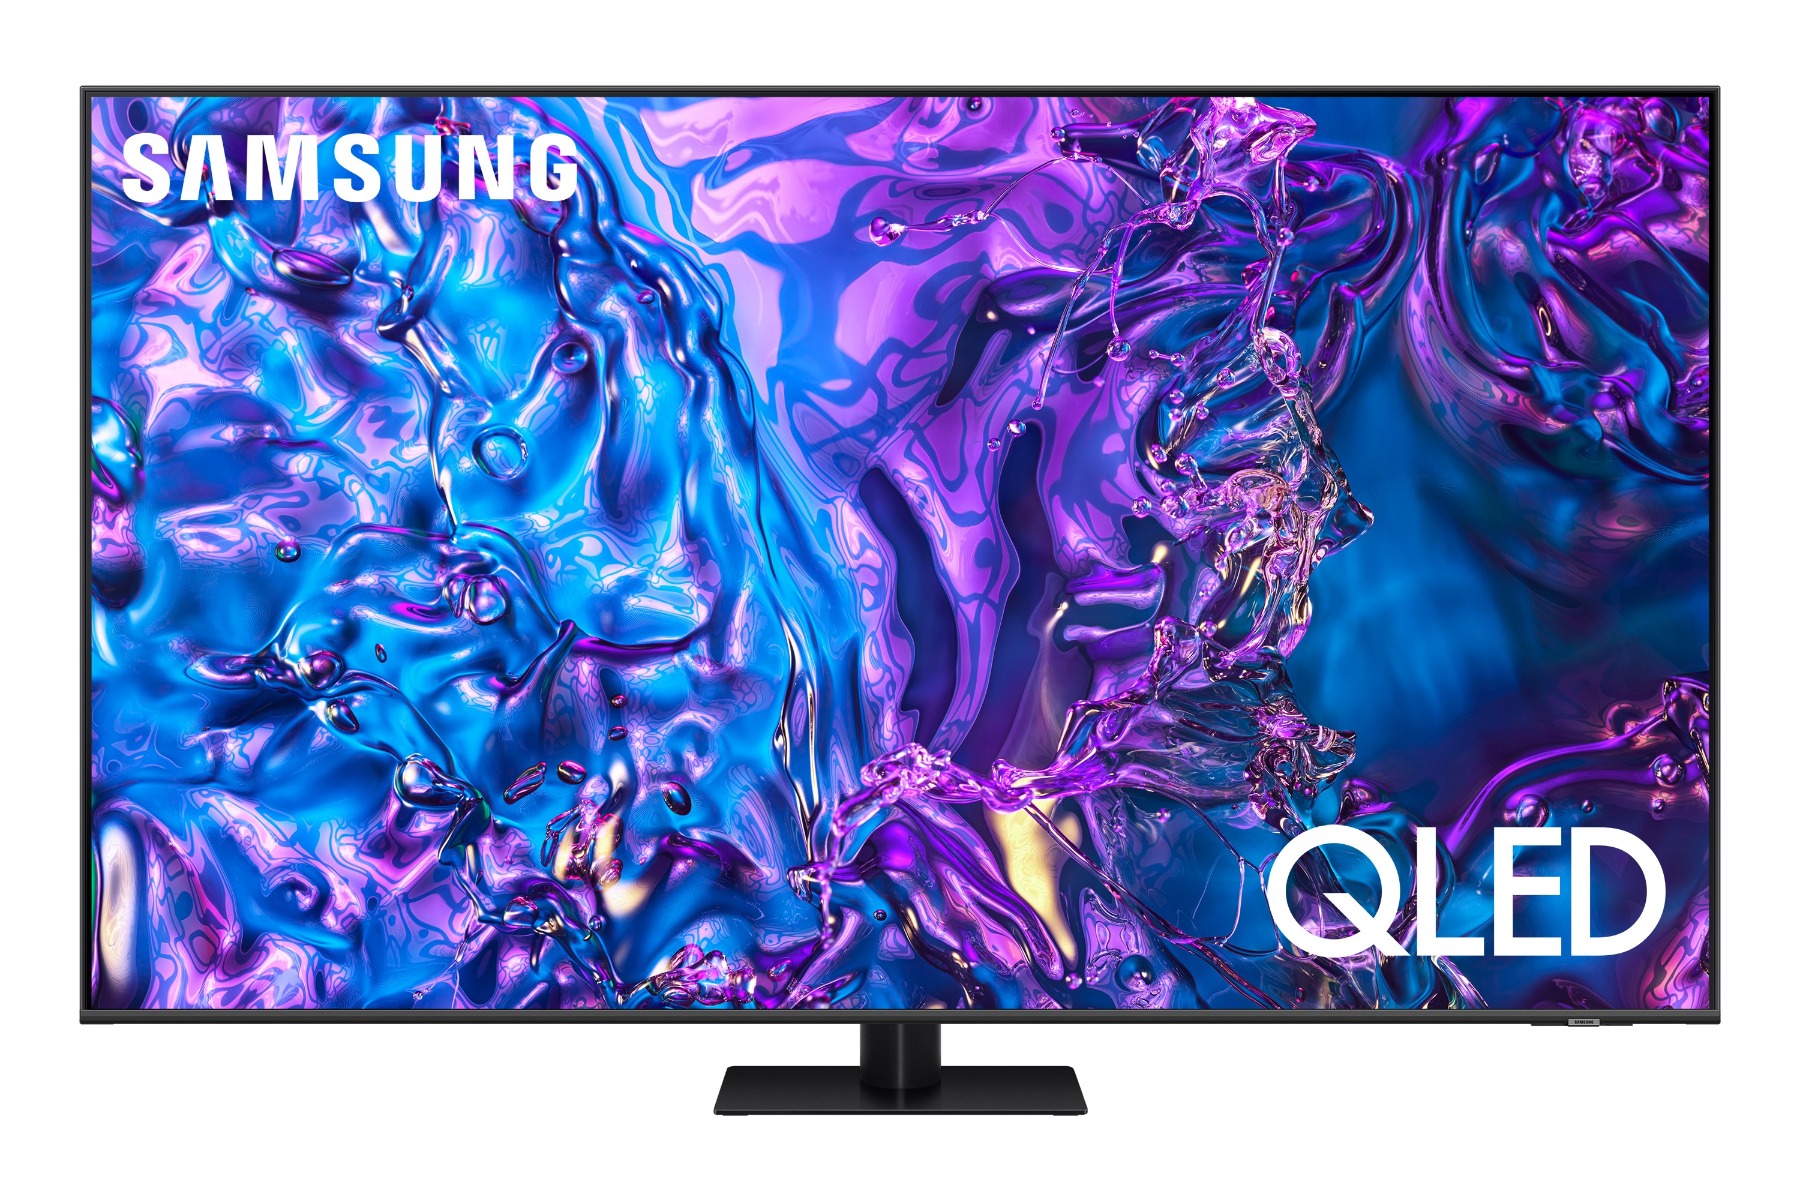 Samsung 65 Inch 4K UHD Smart QLED TV with Built-in Receiver - 65Q70D